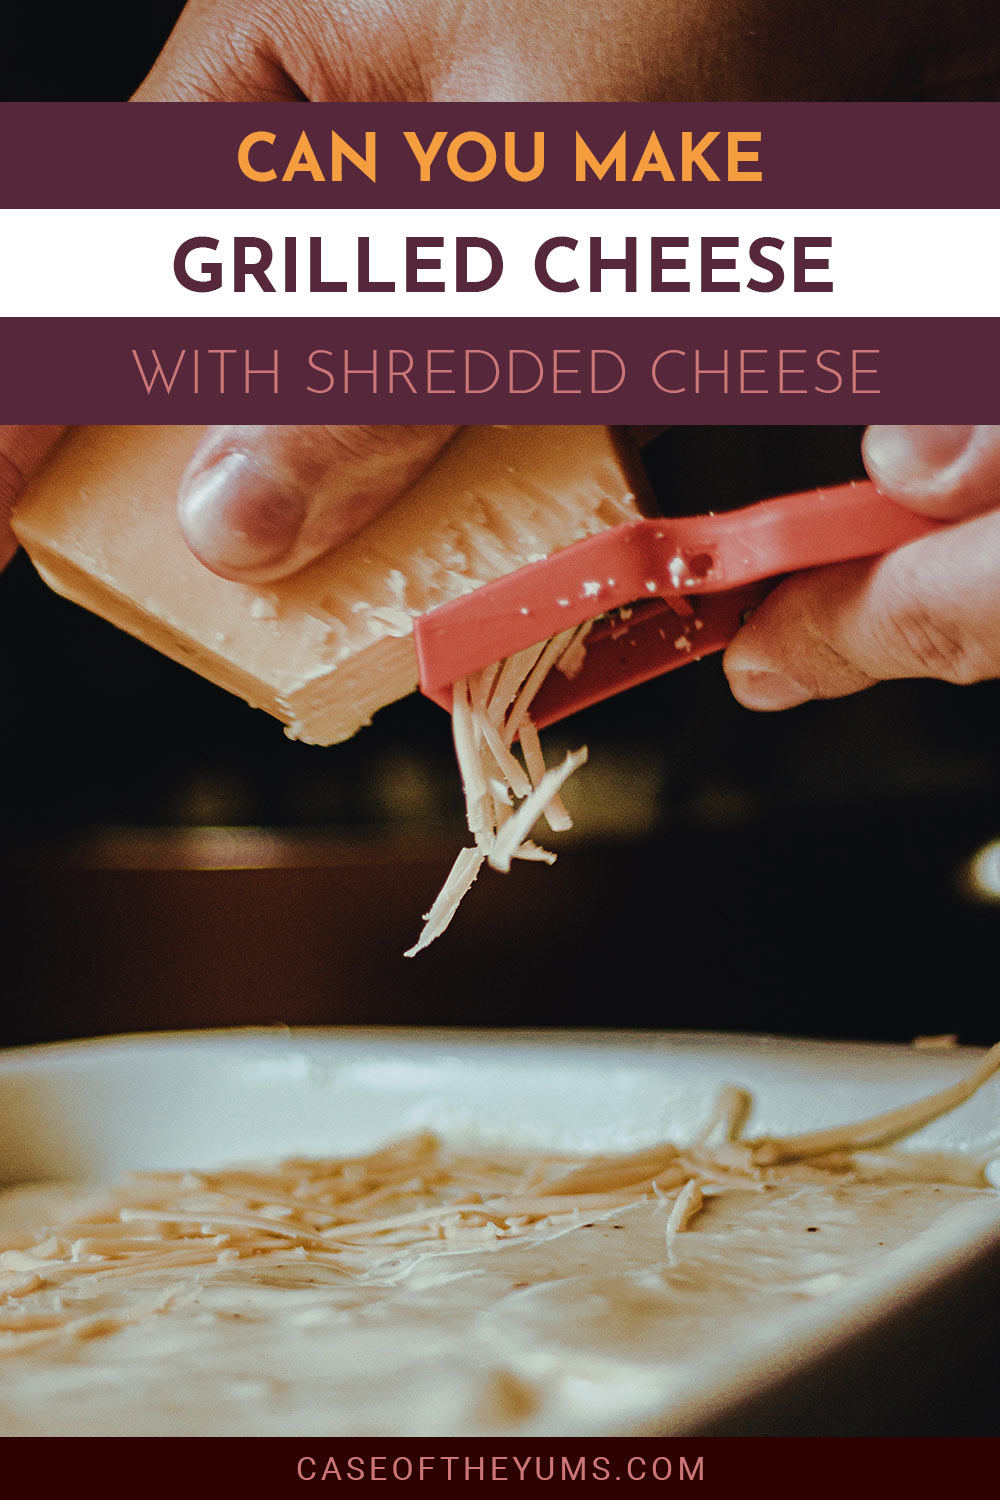 Person shredding cheese with shredder - Can You Make Grilled Cheese with Shredded Cheese